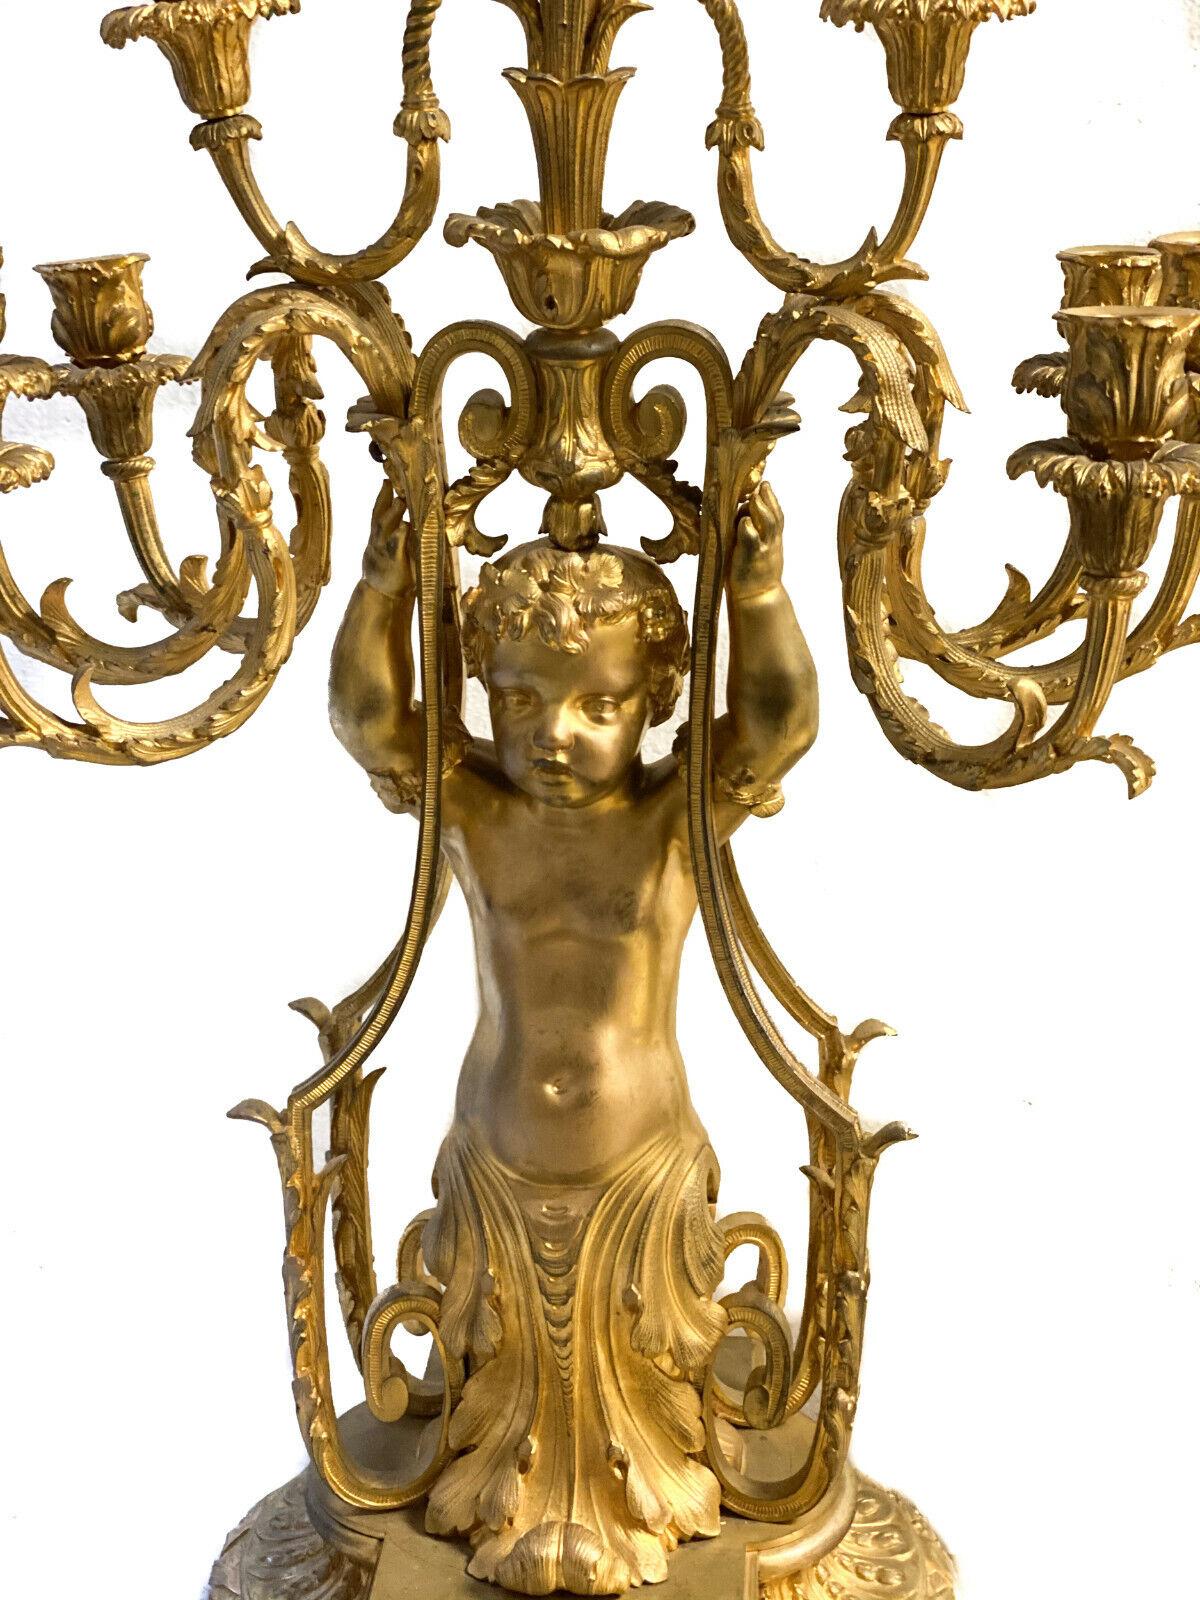 Exquisite pair of French gilt bronze 9 arm figural candelabras, Napoleon III

An exquisite pair of French gilt bronze 9-arm figural candelabras, Napoleon III circa 1860. Each candelabra depicts a figural putti holding up leaf-molded brackets,